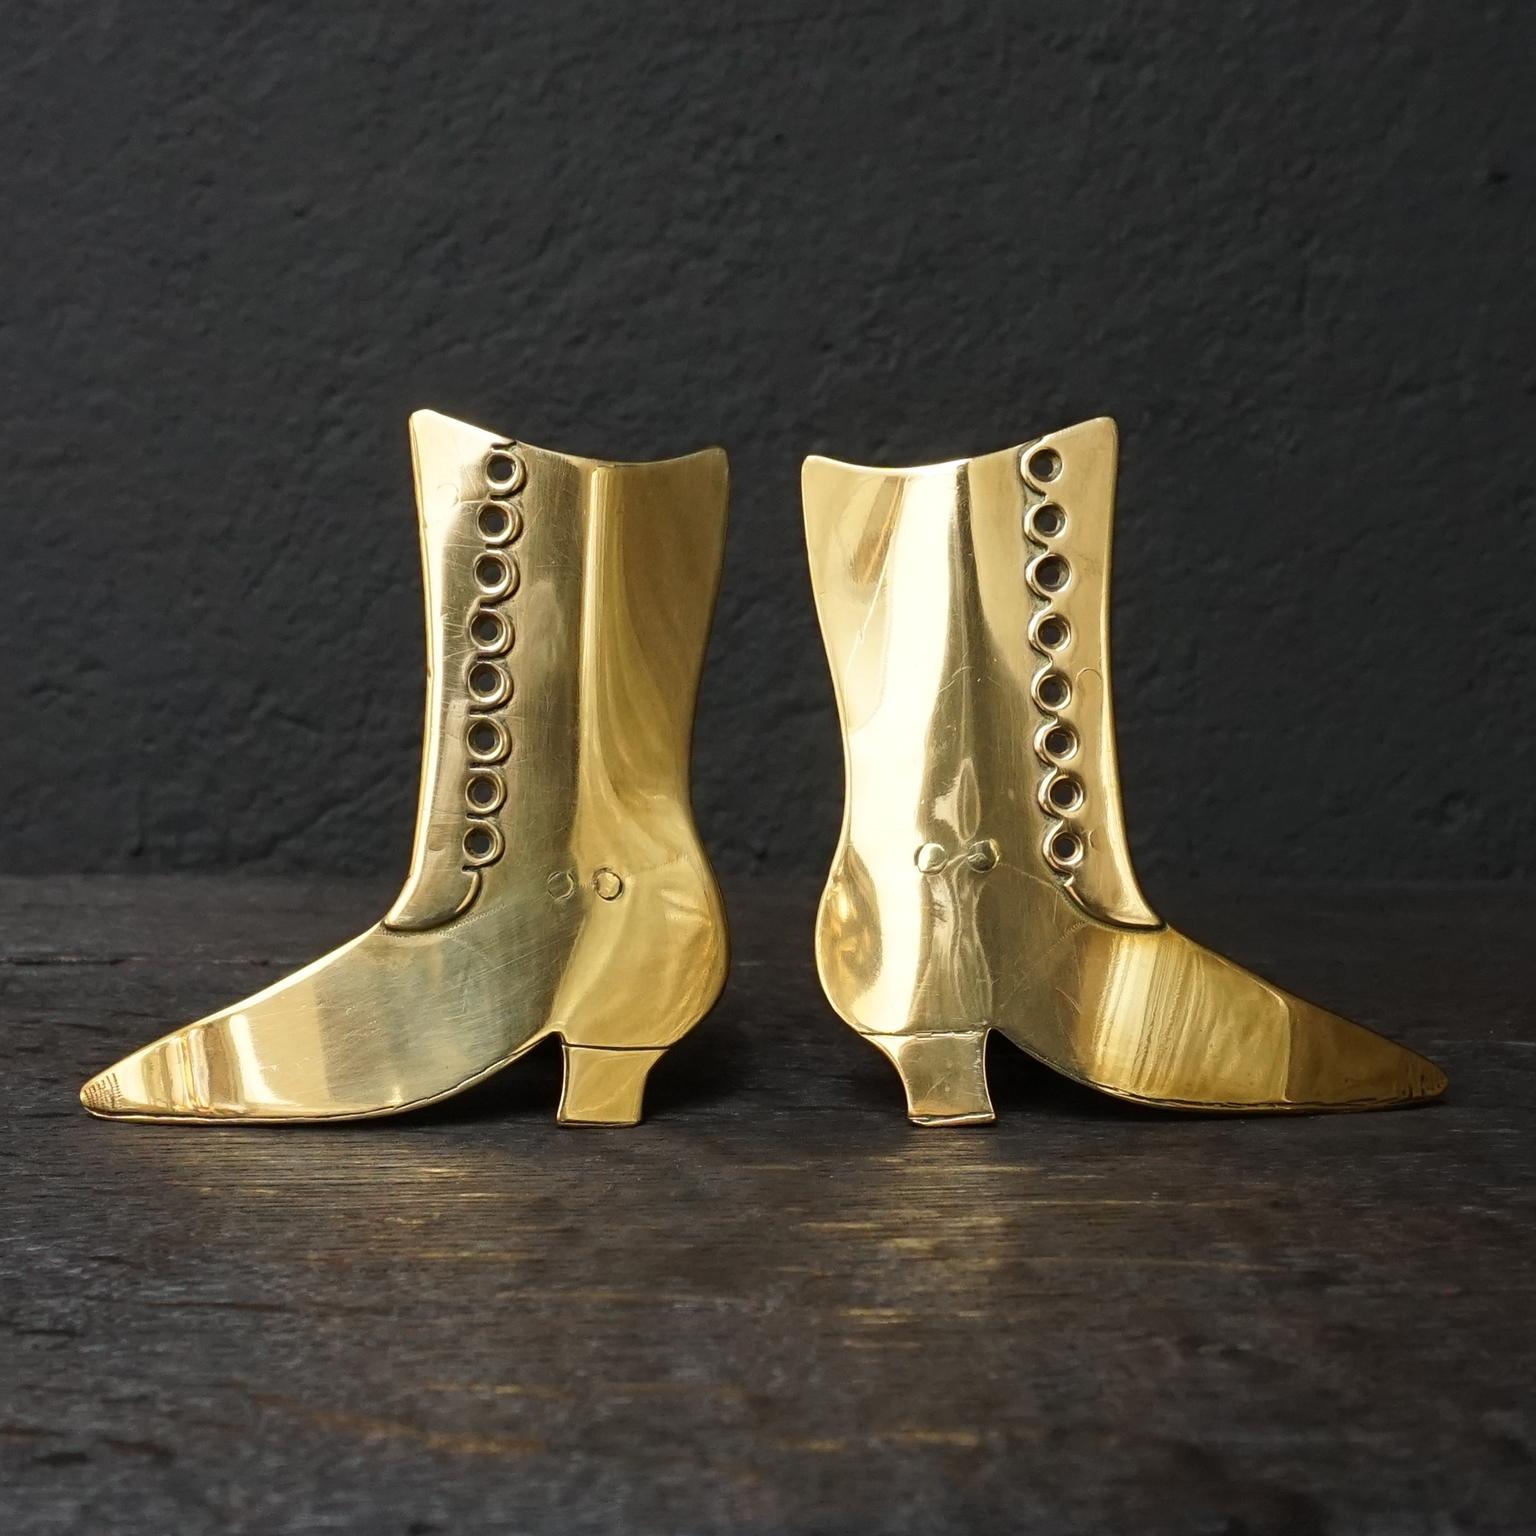 Set of Ten 19th Century English Victorian Brass Chimney Good Luck Shoes or Boots For Sale 2